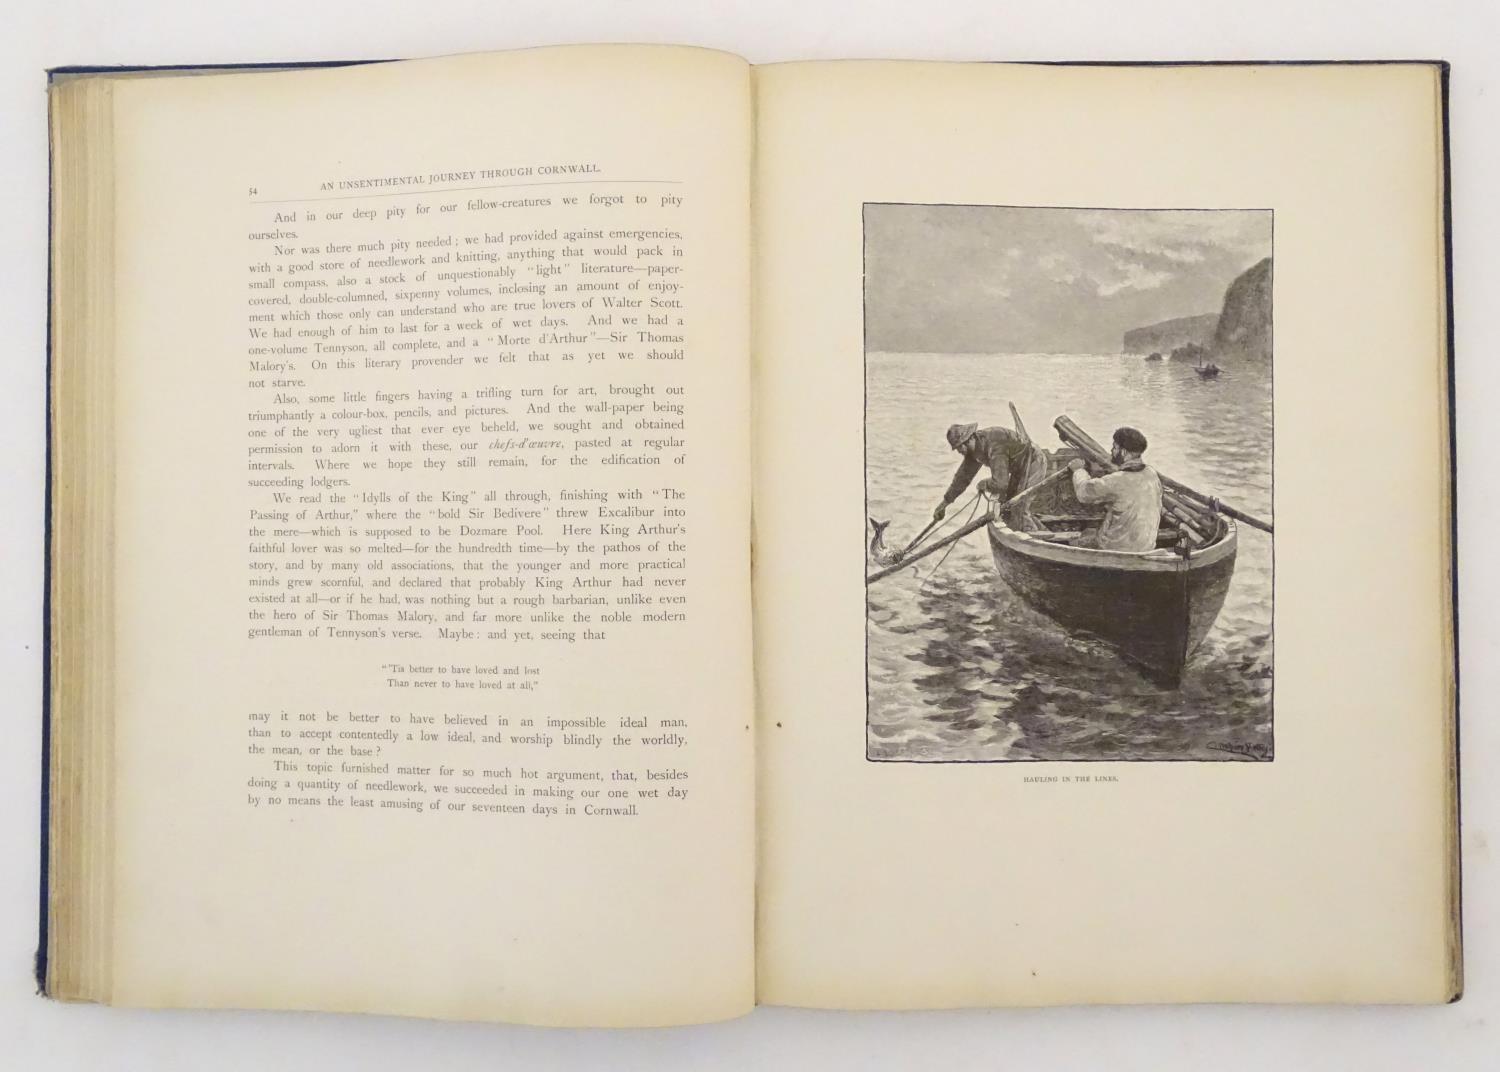 Book: An Unsentimental Journey through Cornwall, by Dinah Mulock Craik, illustrated by C. Napier - Image 7 of 7